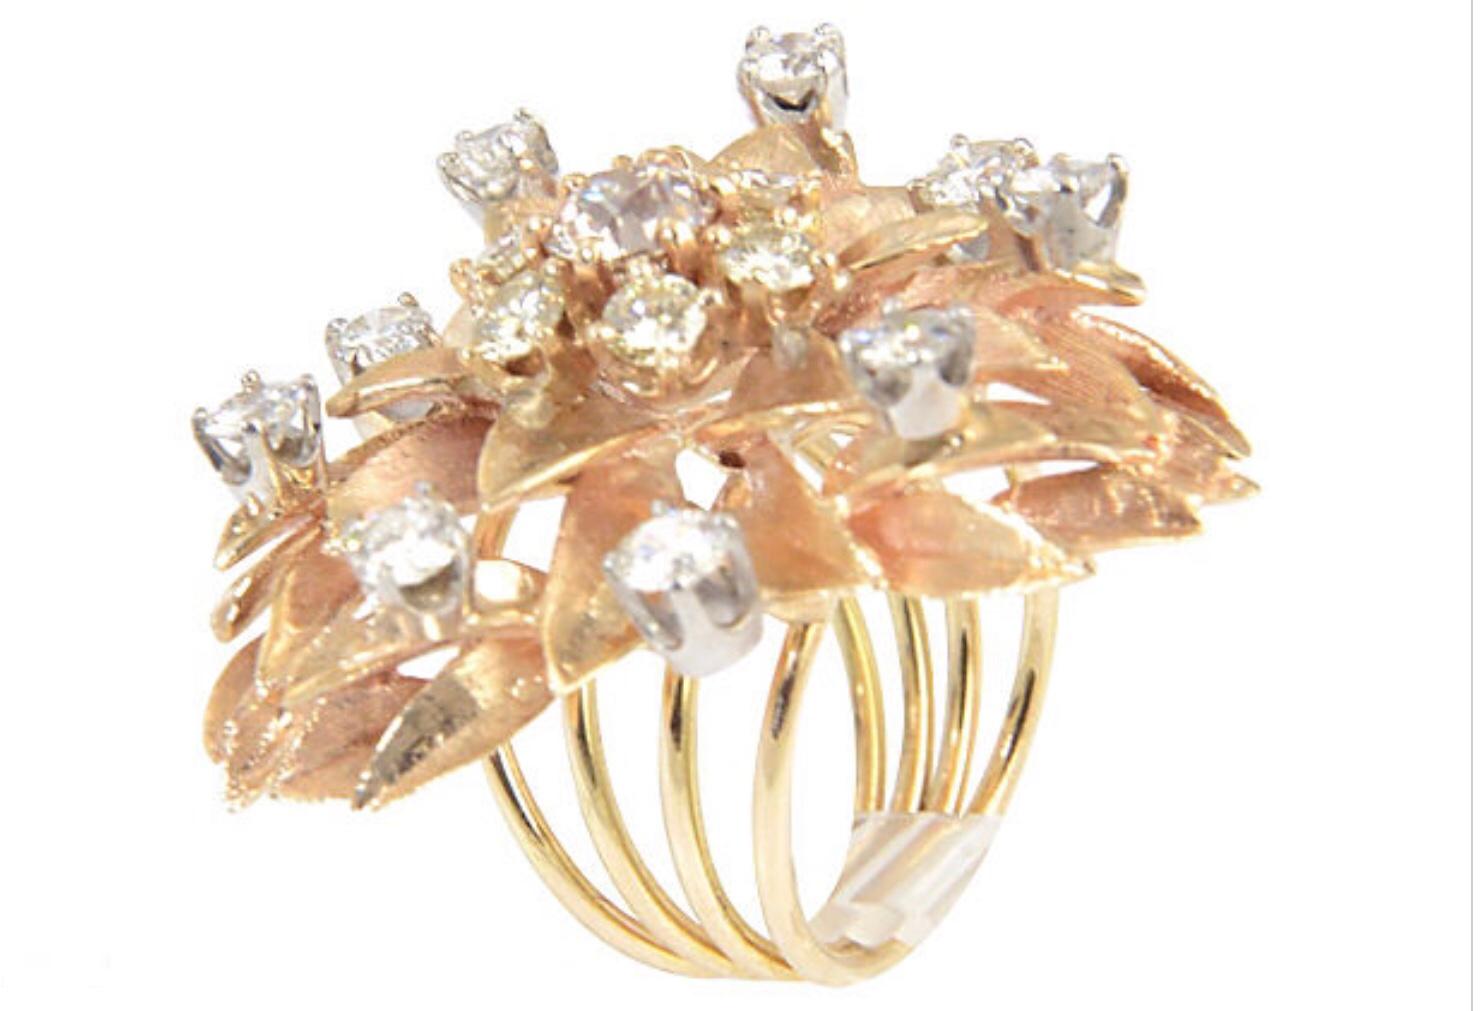 Large 1950s floral ring with over 2.50 carats in diamonds mounted in 14K yellow gold.  The ornament measures  1.30